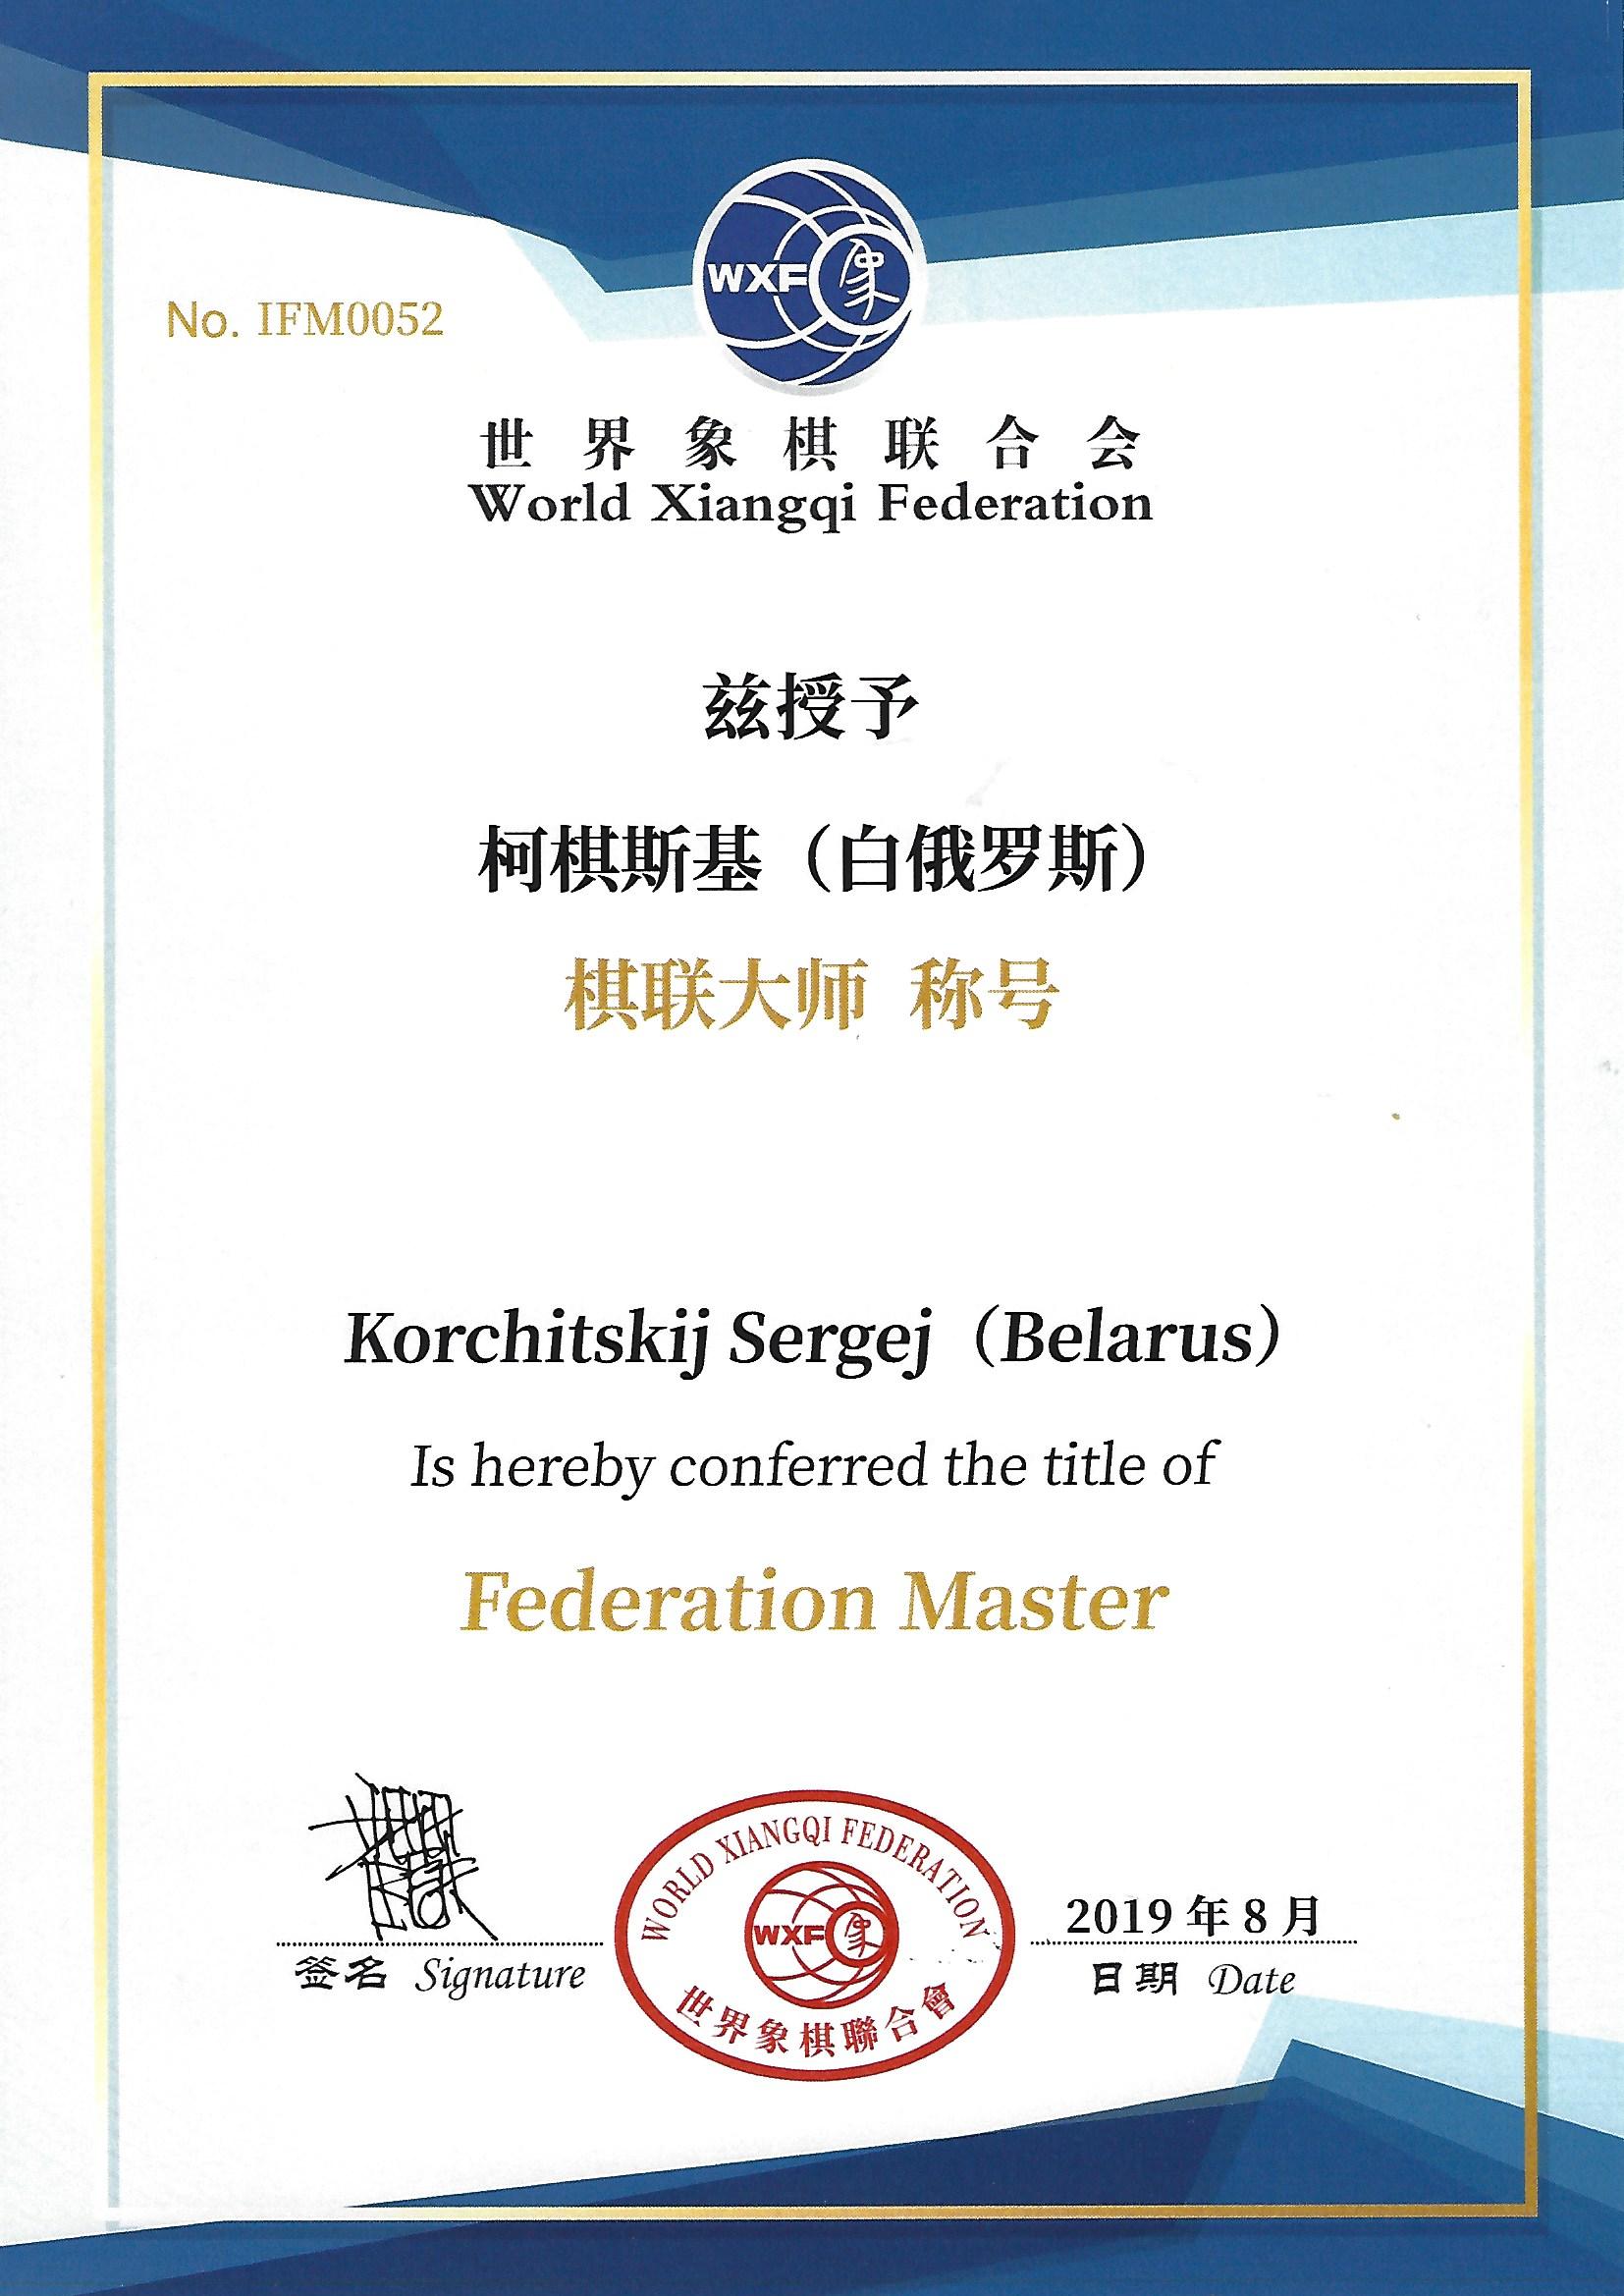 Certificate issued to Xiangqi Federation Master